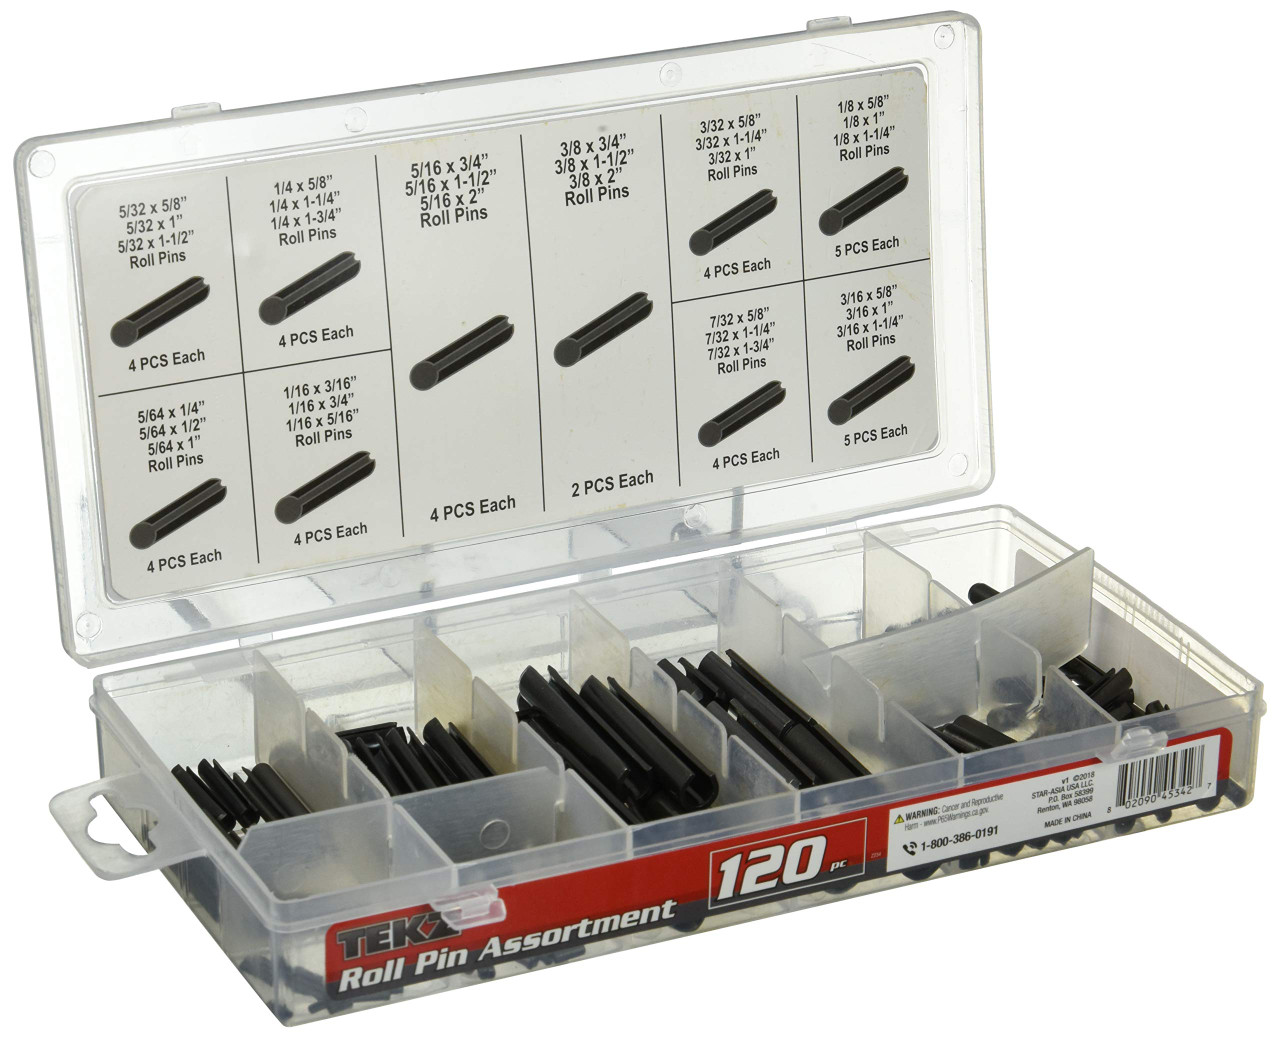 Set of Tekz Roll Pins in a plastic container with labels of sizes, spring pin, roll pin